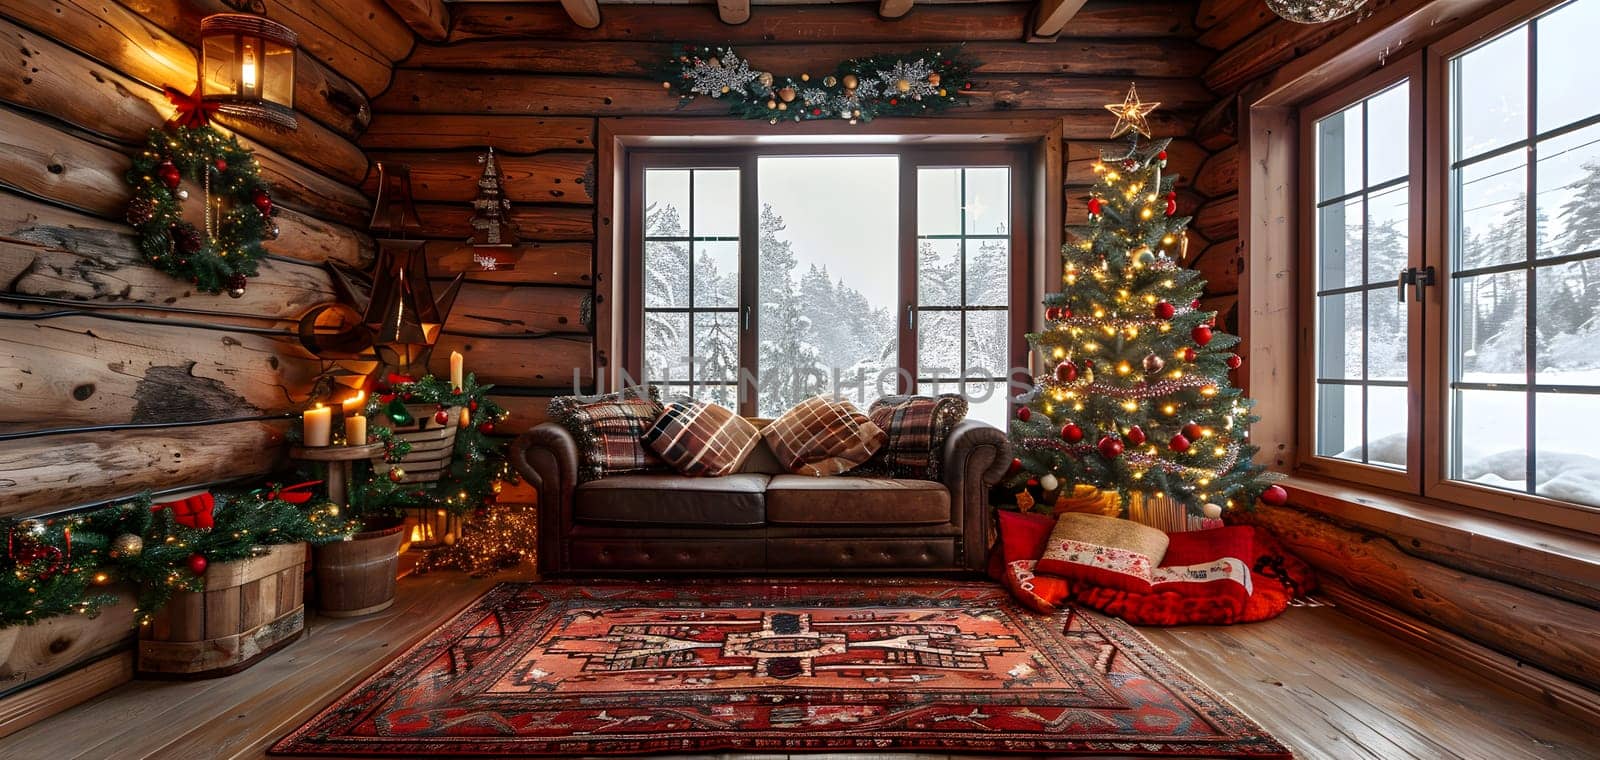 Wooden log cabin living room with couch, Christmas tree, and decorations by Nadtochiy